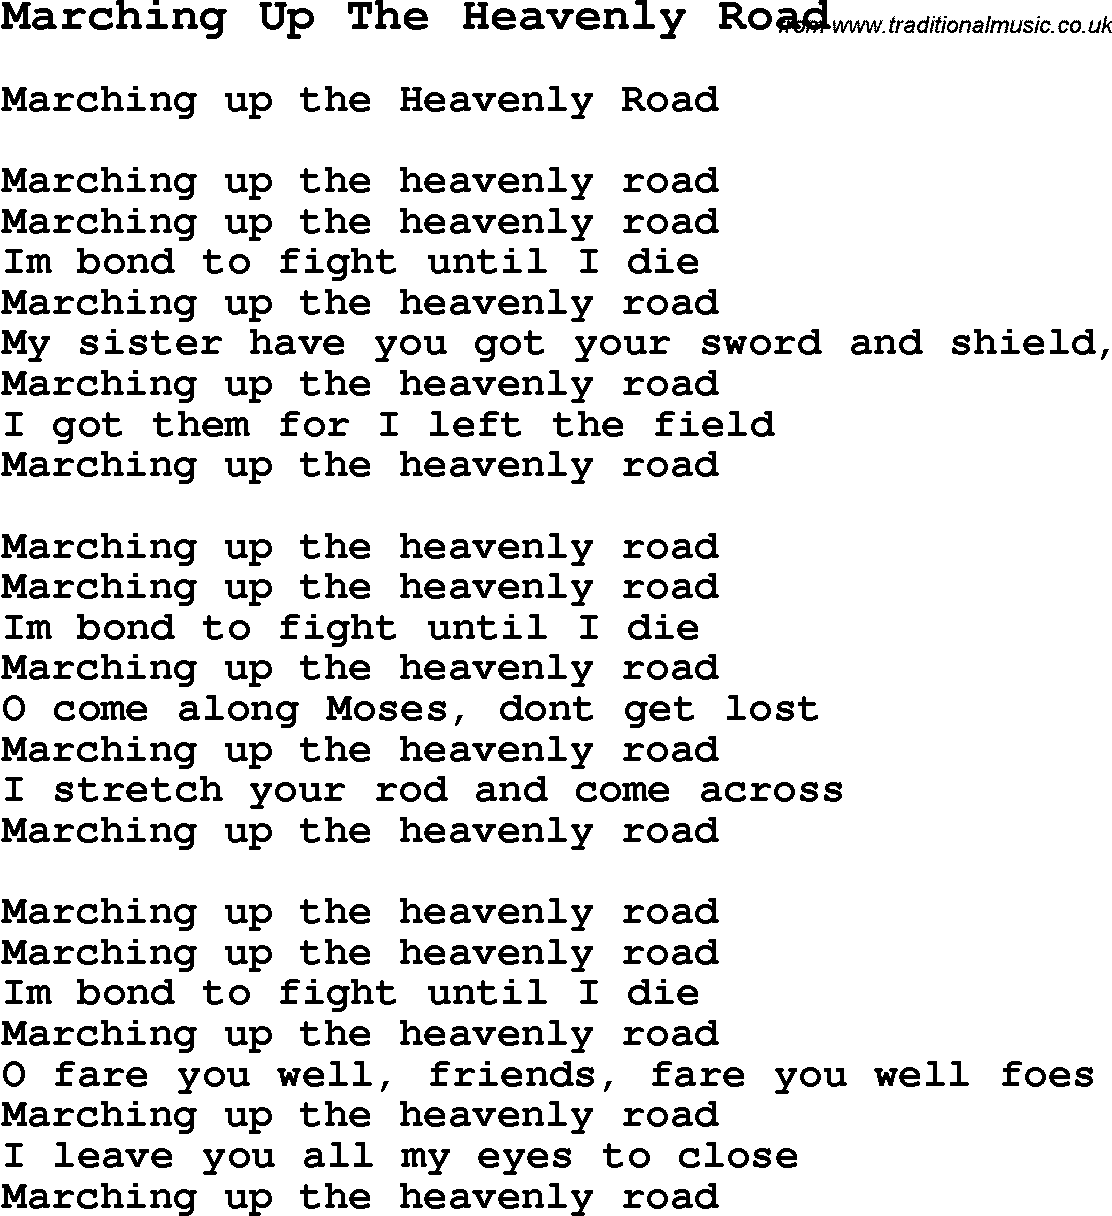 Negro Spiritual Song Lyrics for Marching Up The Heavenly Road